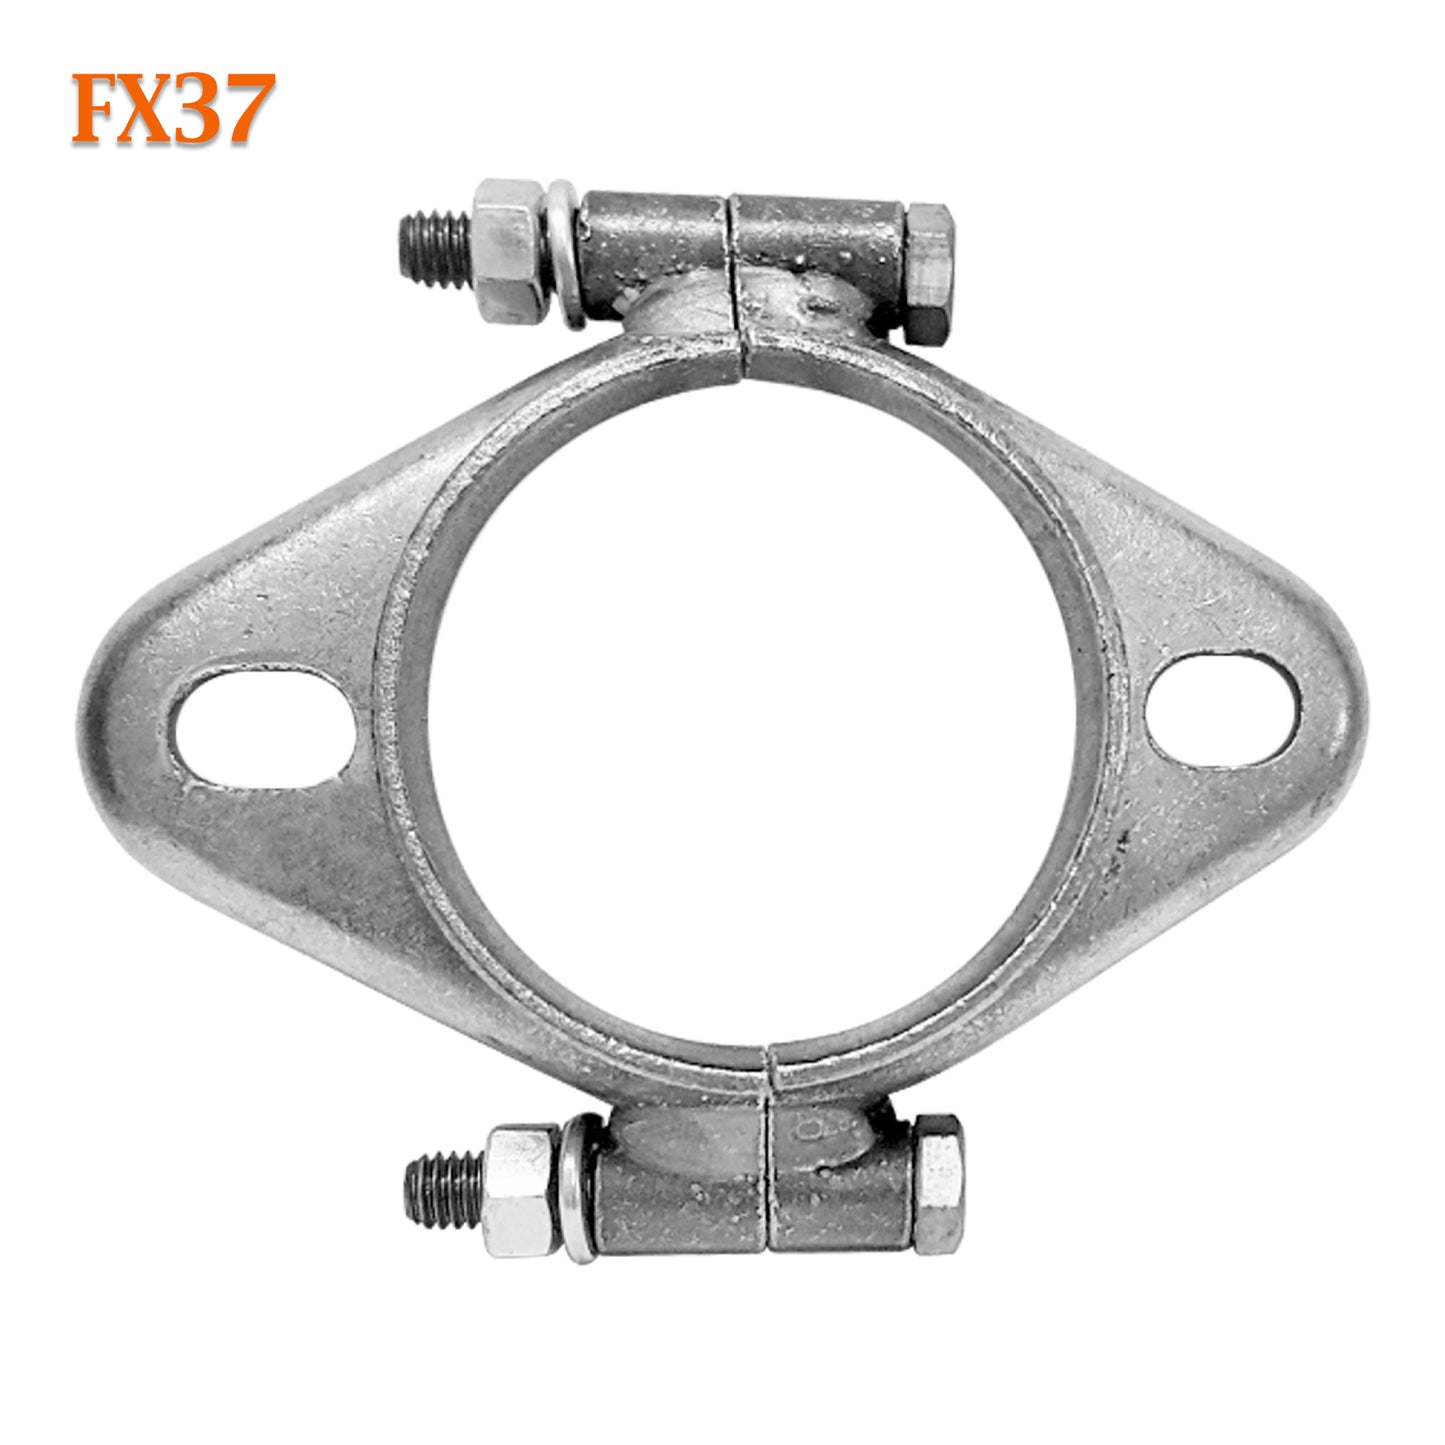 FX37 2 1/2" ID Exhaust Flange Formed Oval Side Split For 2 1/4" OD Flared Pipe